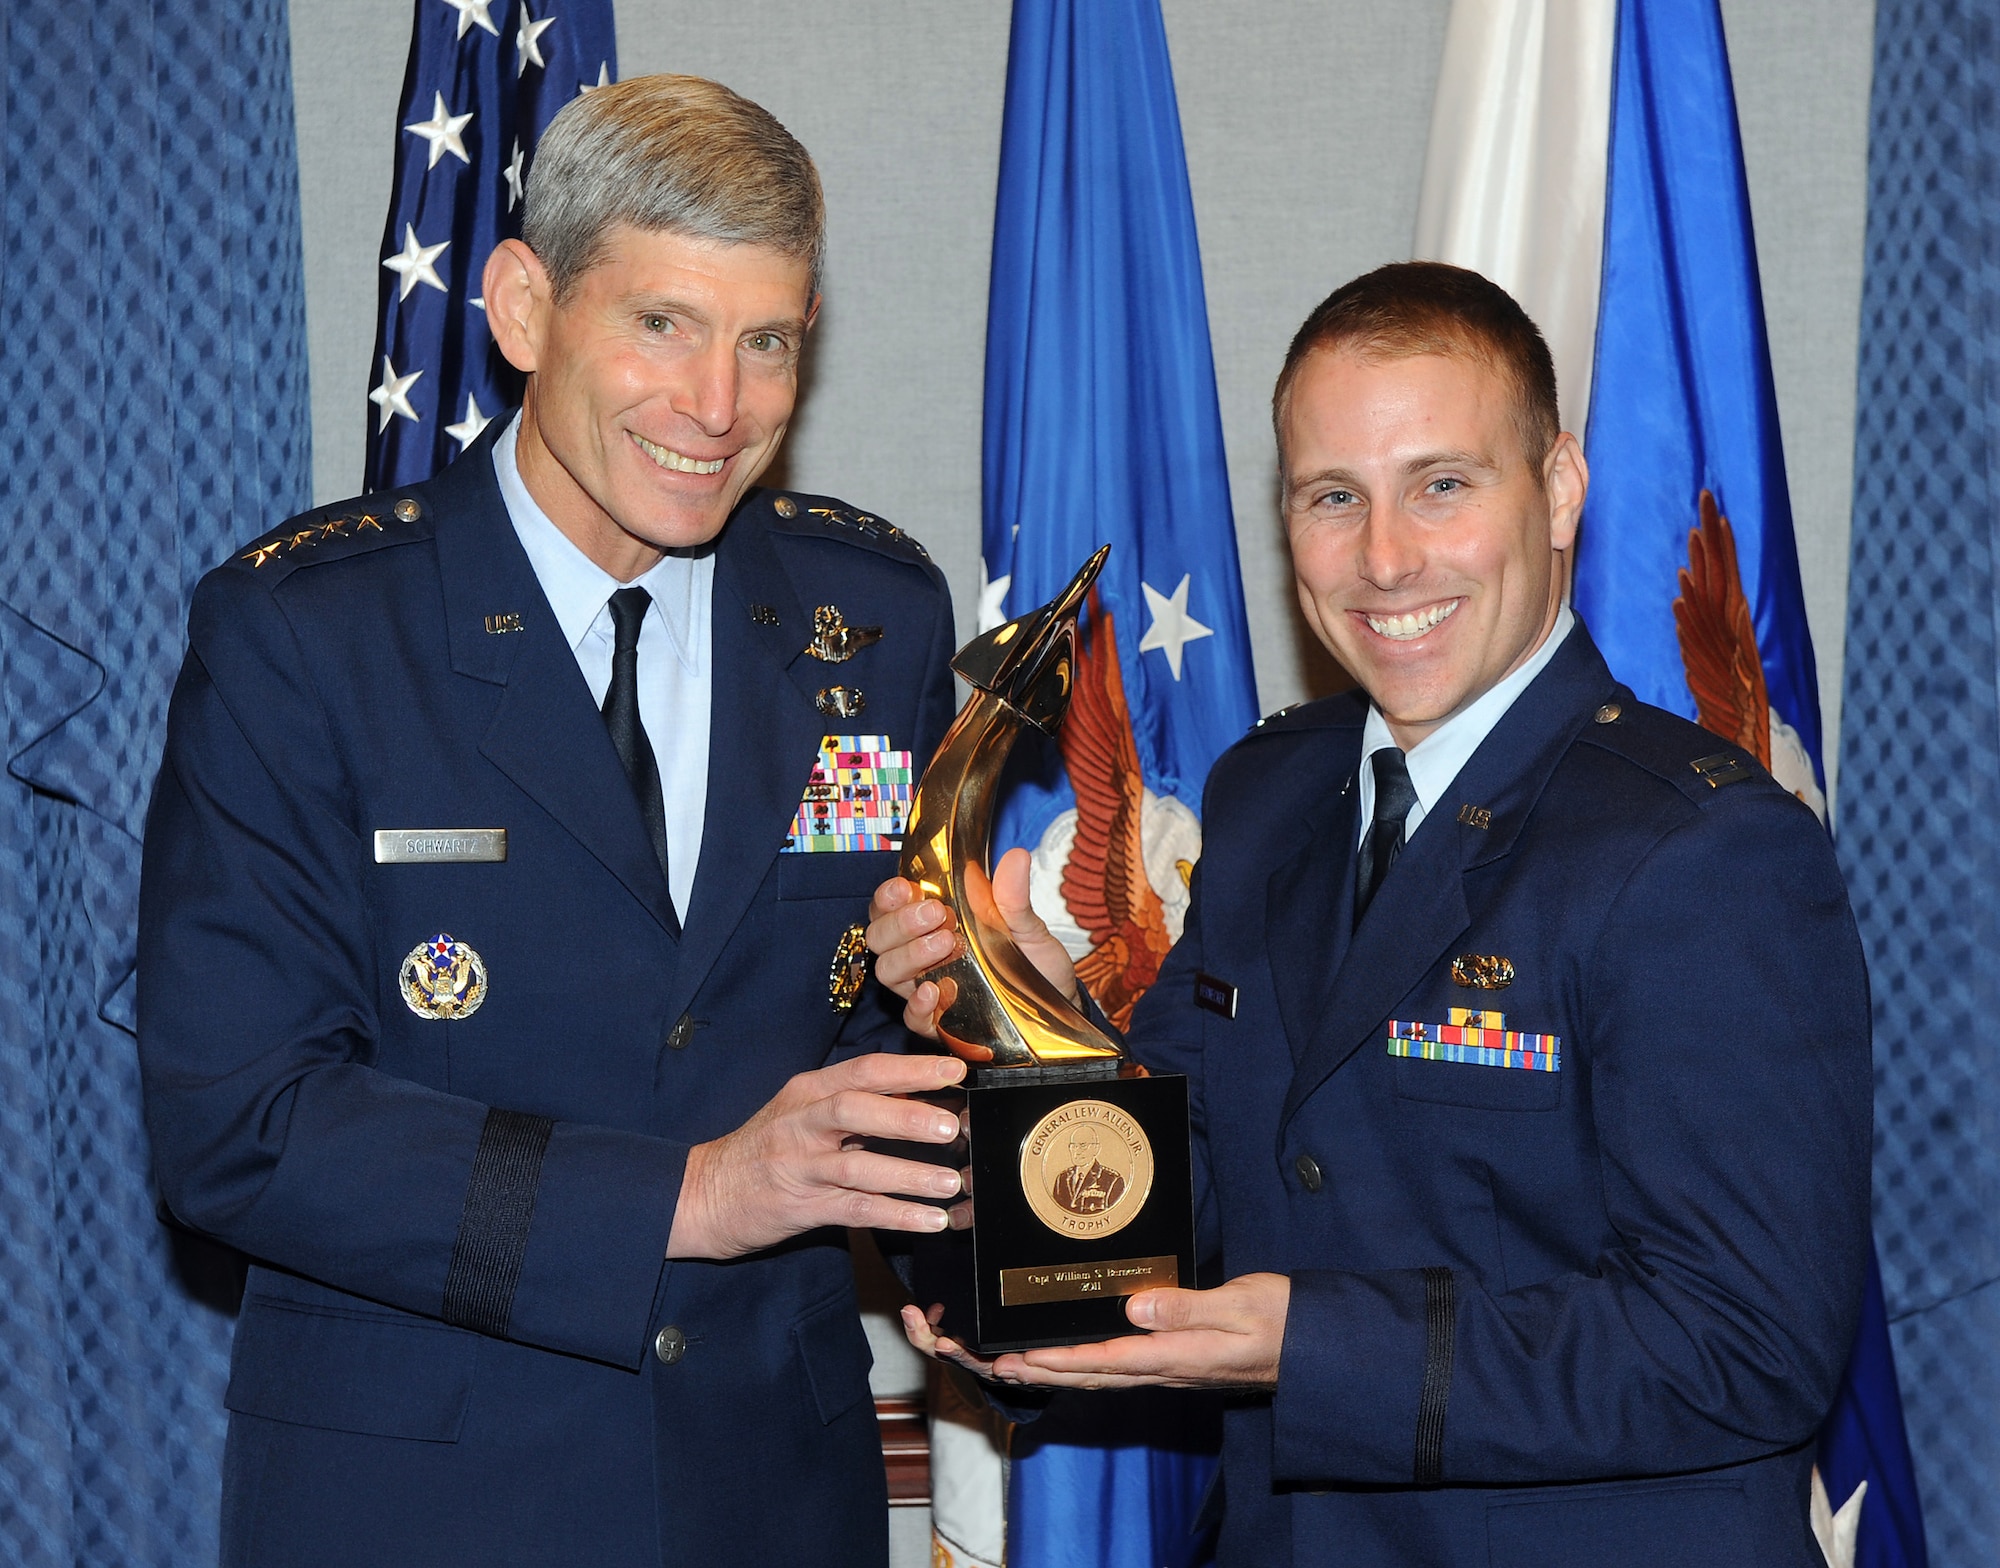 Air Force Chief of Staff Gen. Norton Schwartz presents the Gen. Lew Allen Jr. Trophy to Capt. William Bernecker during a ceremony Oct. 28, 2011 in the Pentagon. The trophy is awarded annually to a base-level officers and senior NCO in the aircraft, munitions or missile maintenance fields directly involved in sortie generation. (U.S. Air Force photo)